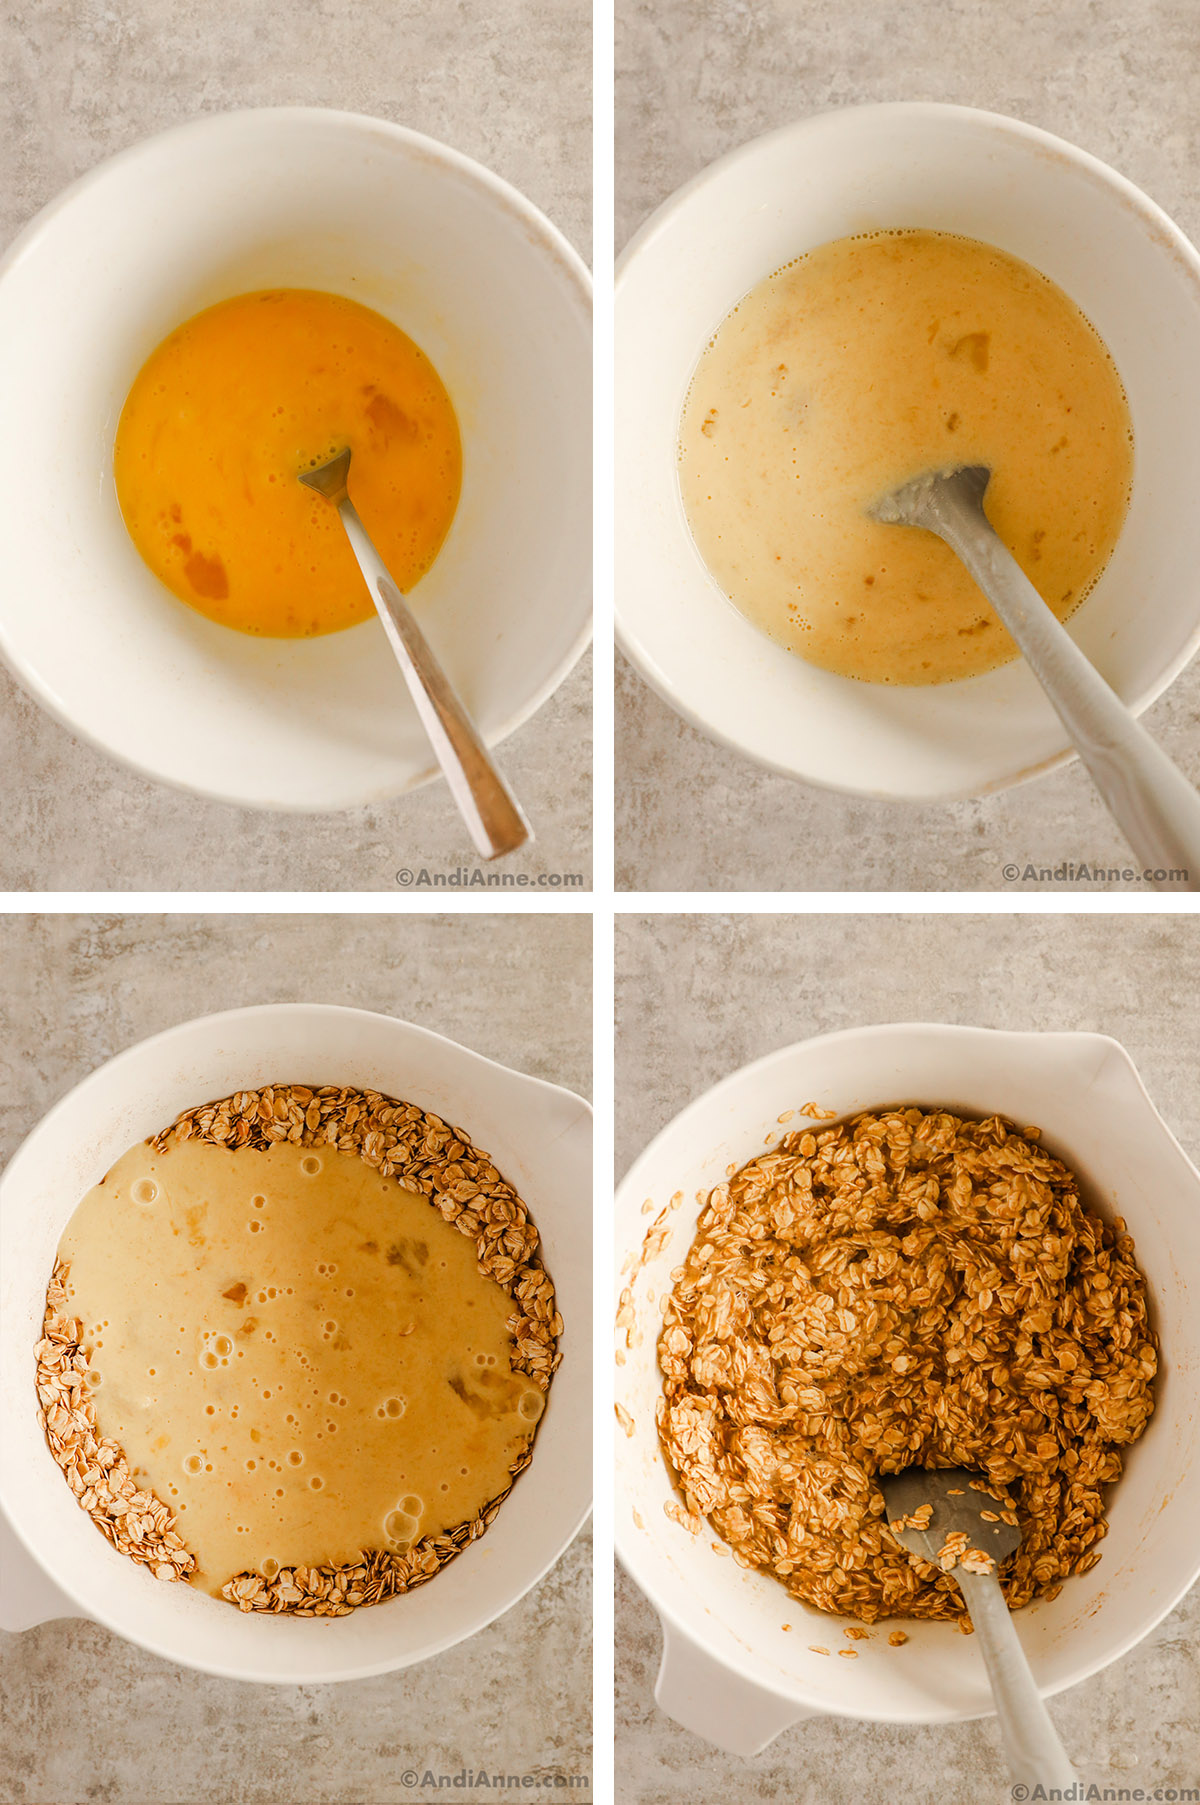 Four images of steps to make recipe. First two are liquid ingredients in a bowl. Third is a bowl with oats and liquid ingredients poured over top. Fourth is wet oats ingredients.